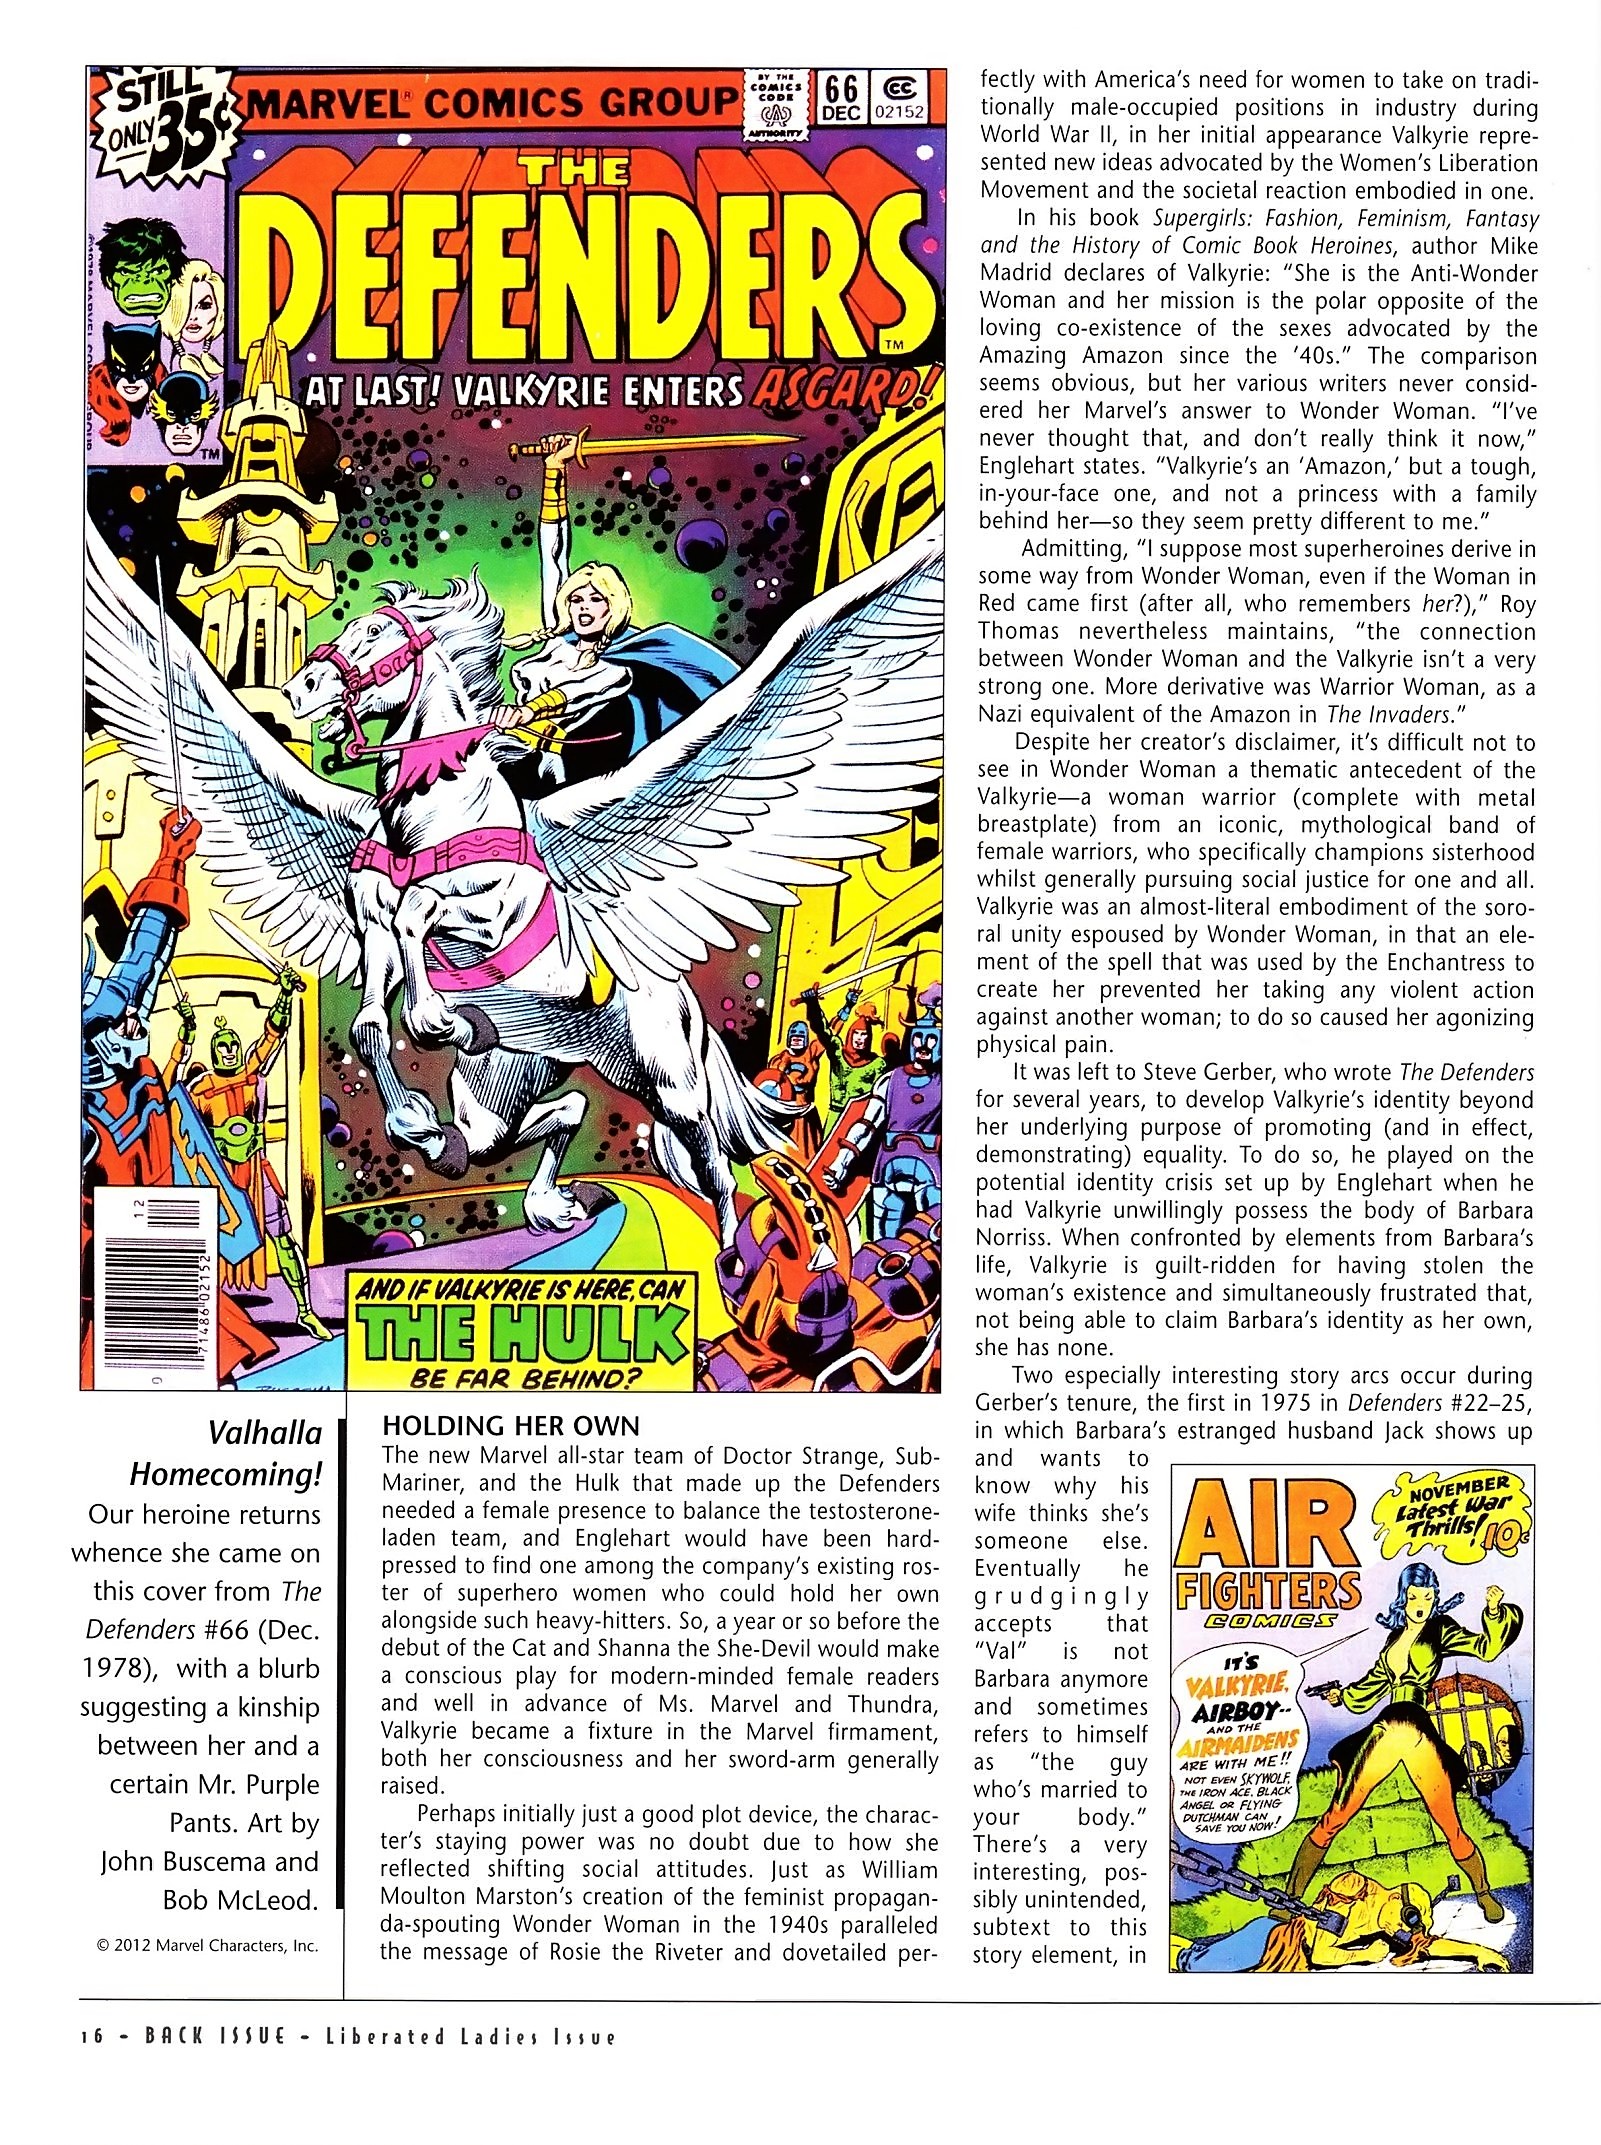 Read online Back Issue comic -  Issue #54 - 16